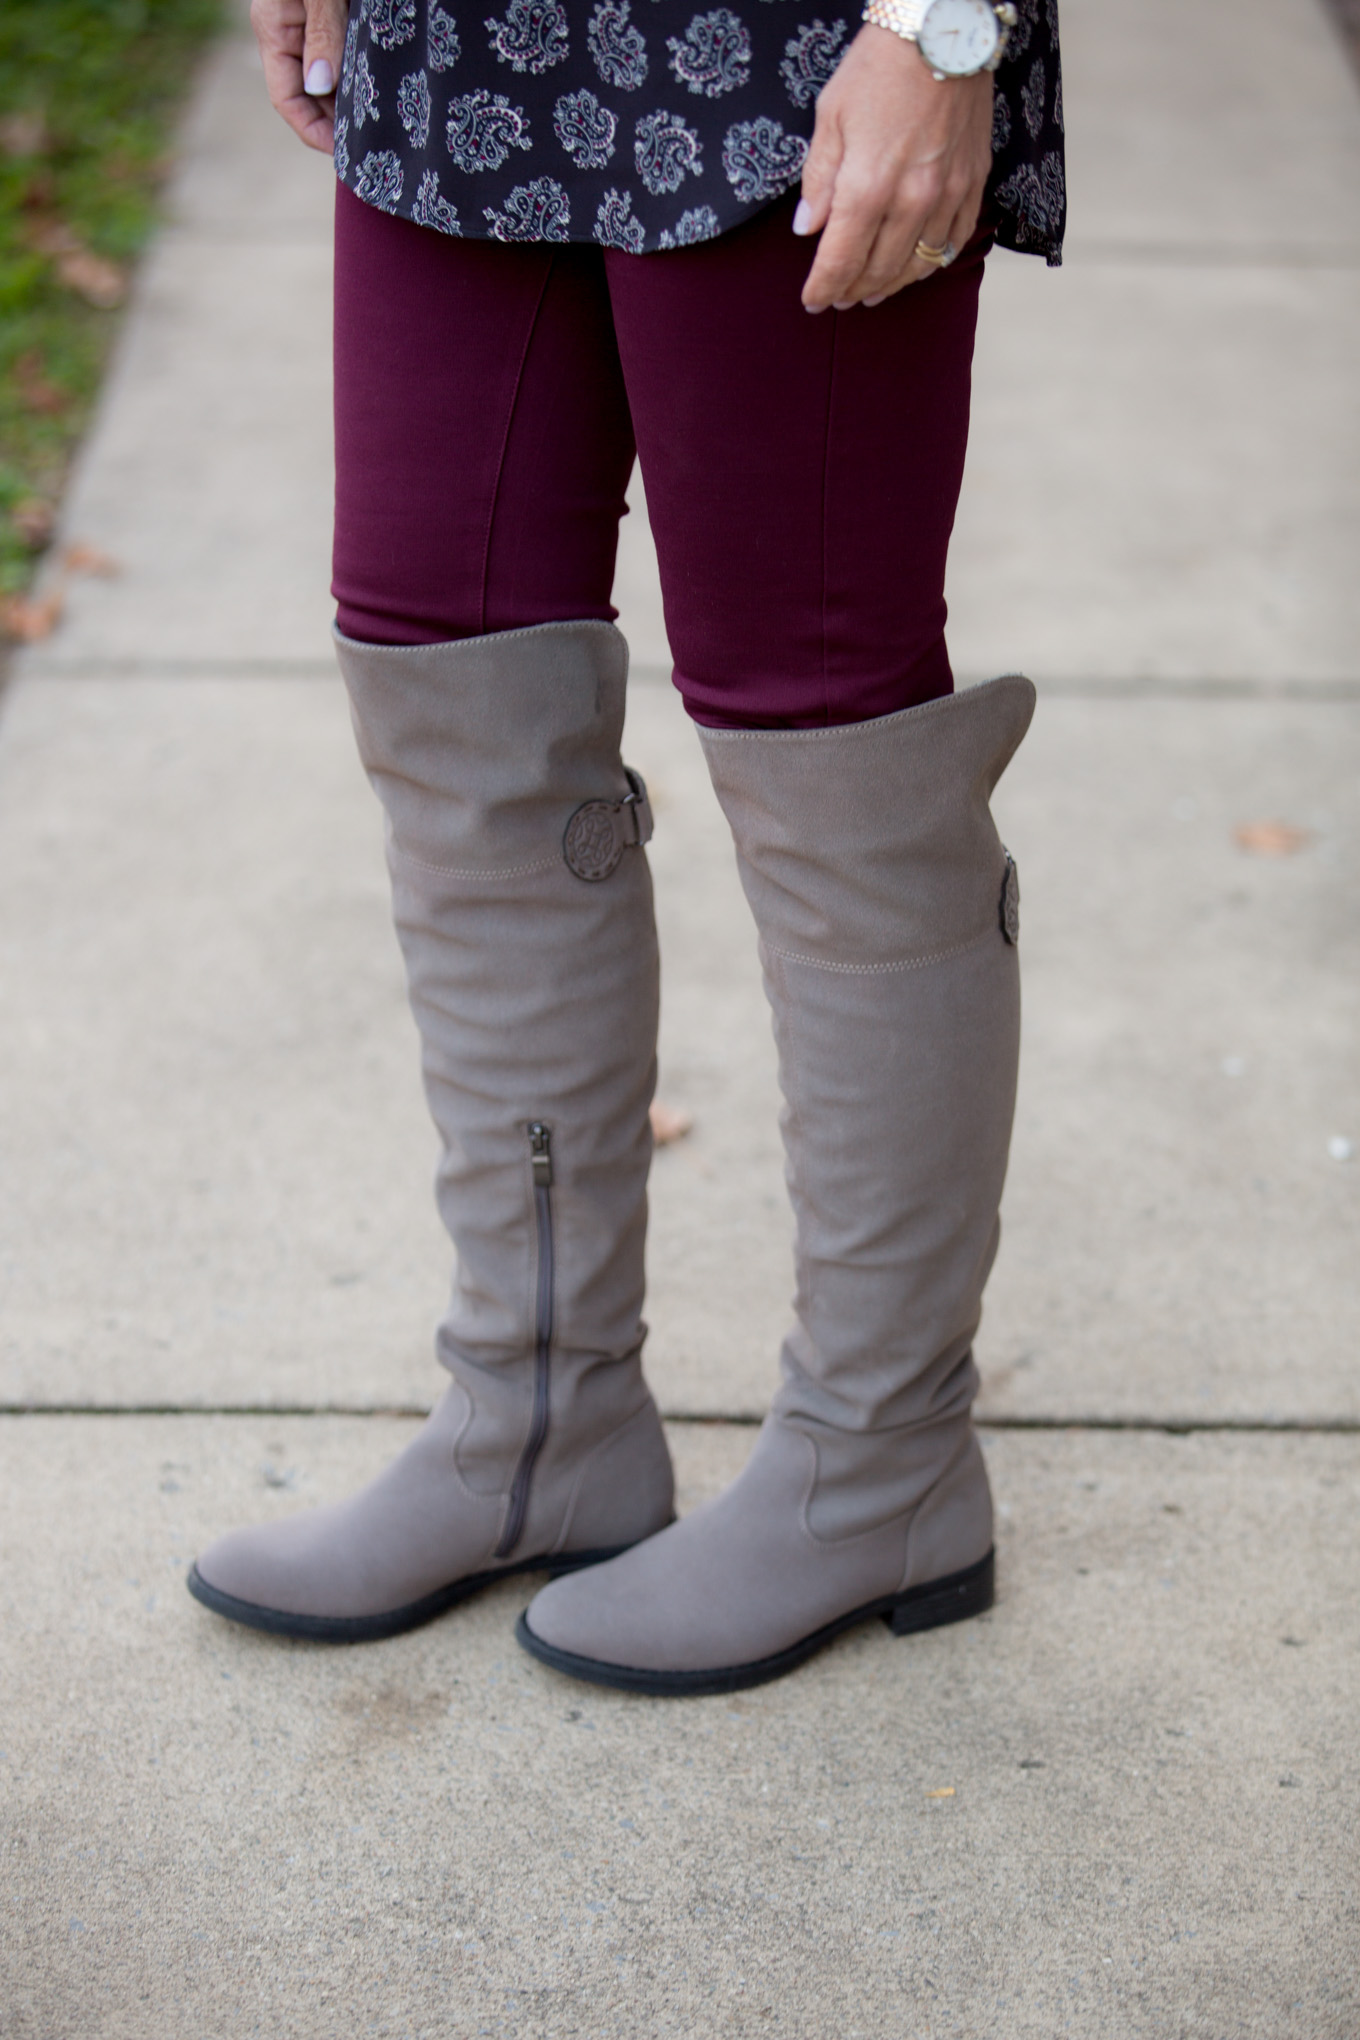 Fashion blogger, Cyndi Spivey, styling two trendy boot styles available at Rack Room Shoes Early Black Friday Sale.